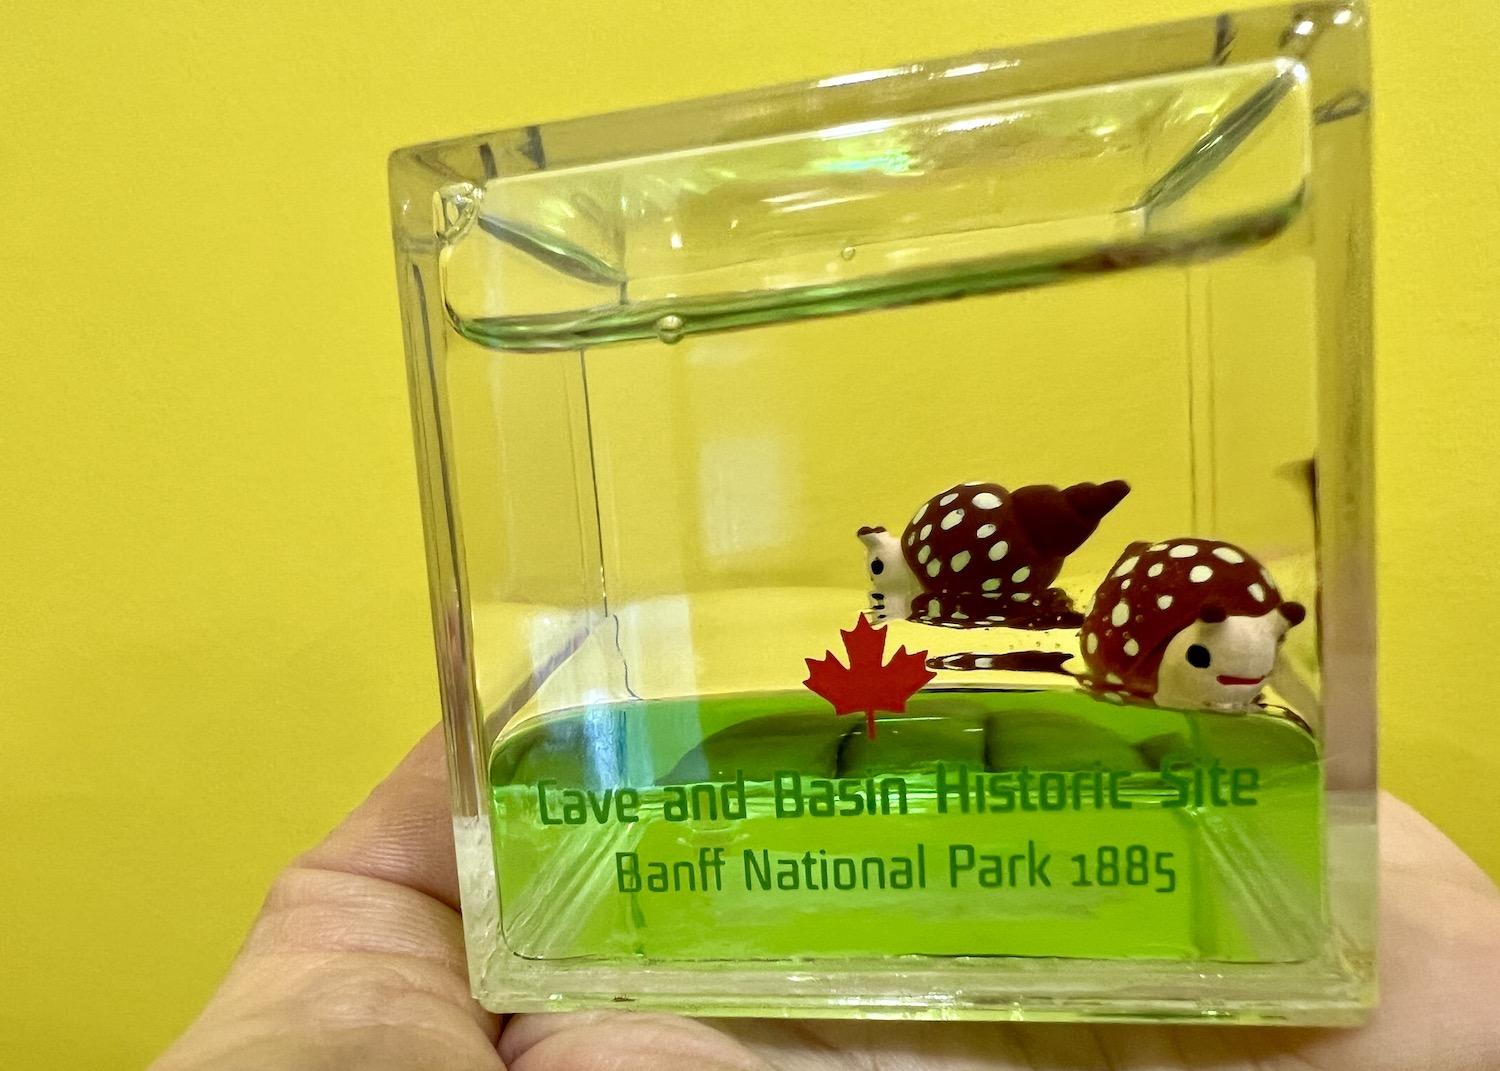 The gift shop at Cave and Basin National Historic Site sells this water globe with two endangered Banff Springs Snails.